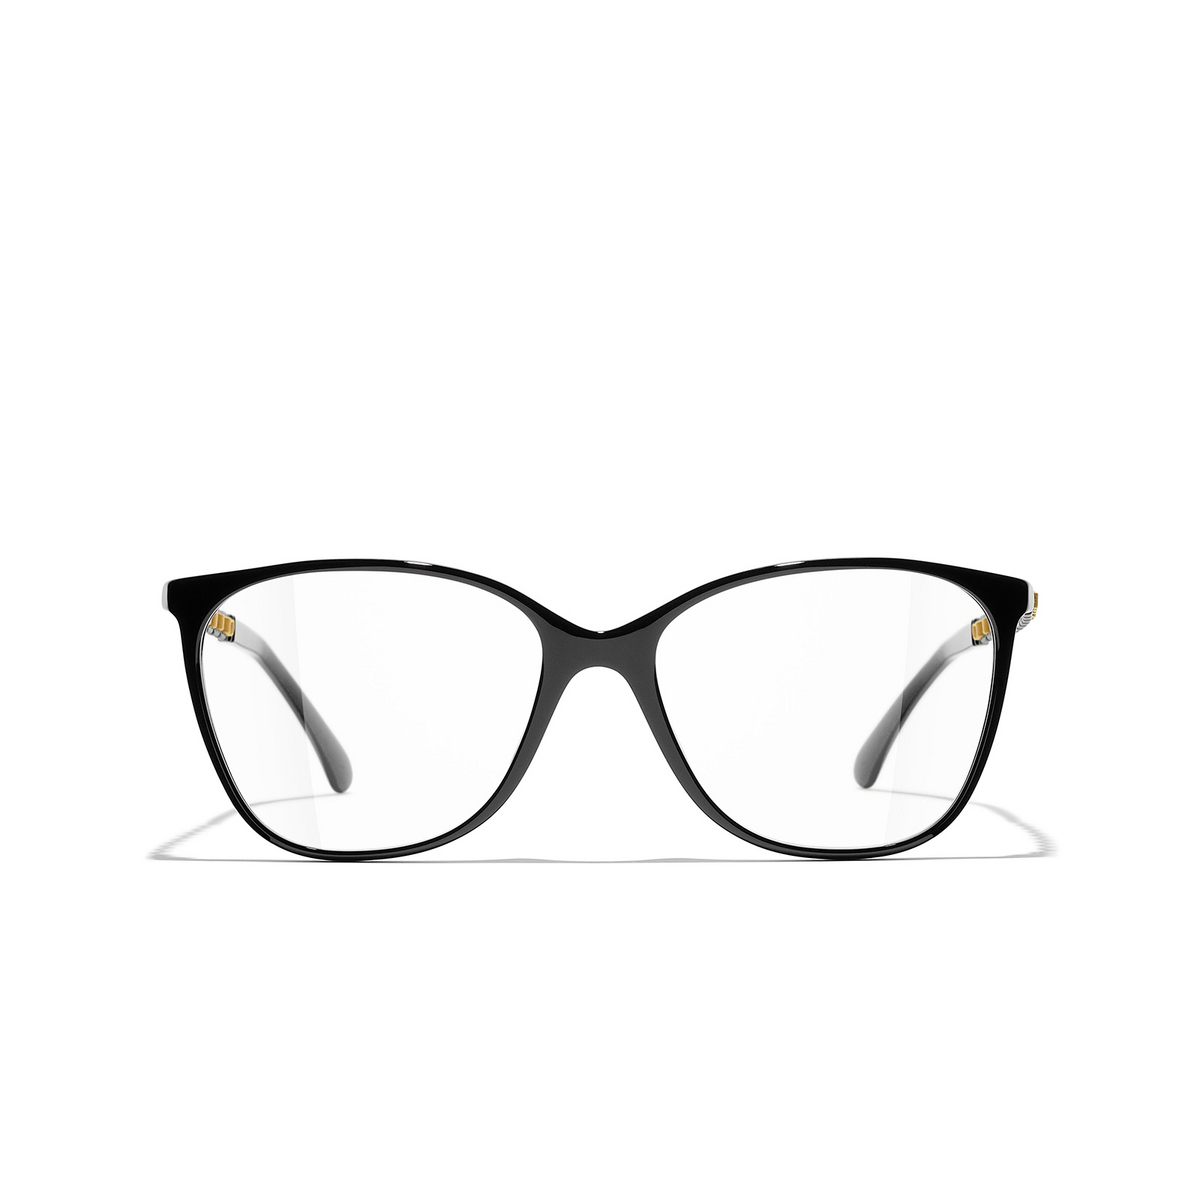 CHANEL square Eyeglasses 1712 Black & Yellow - front view